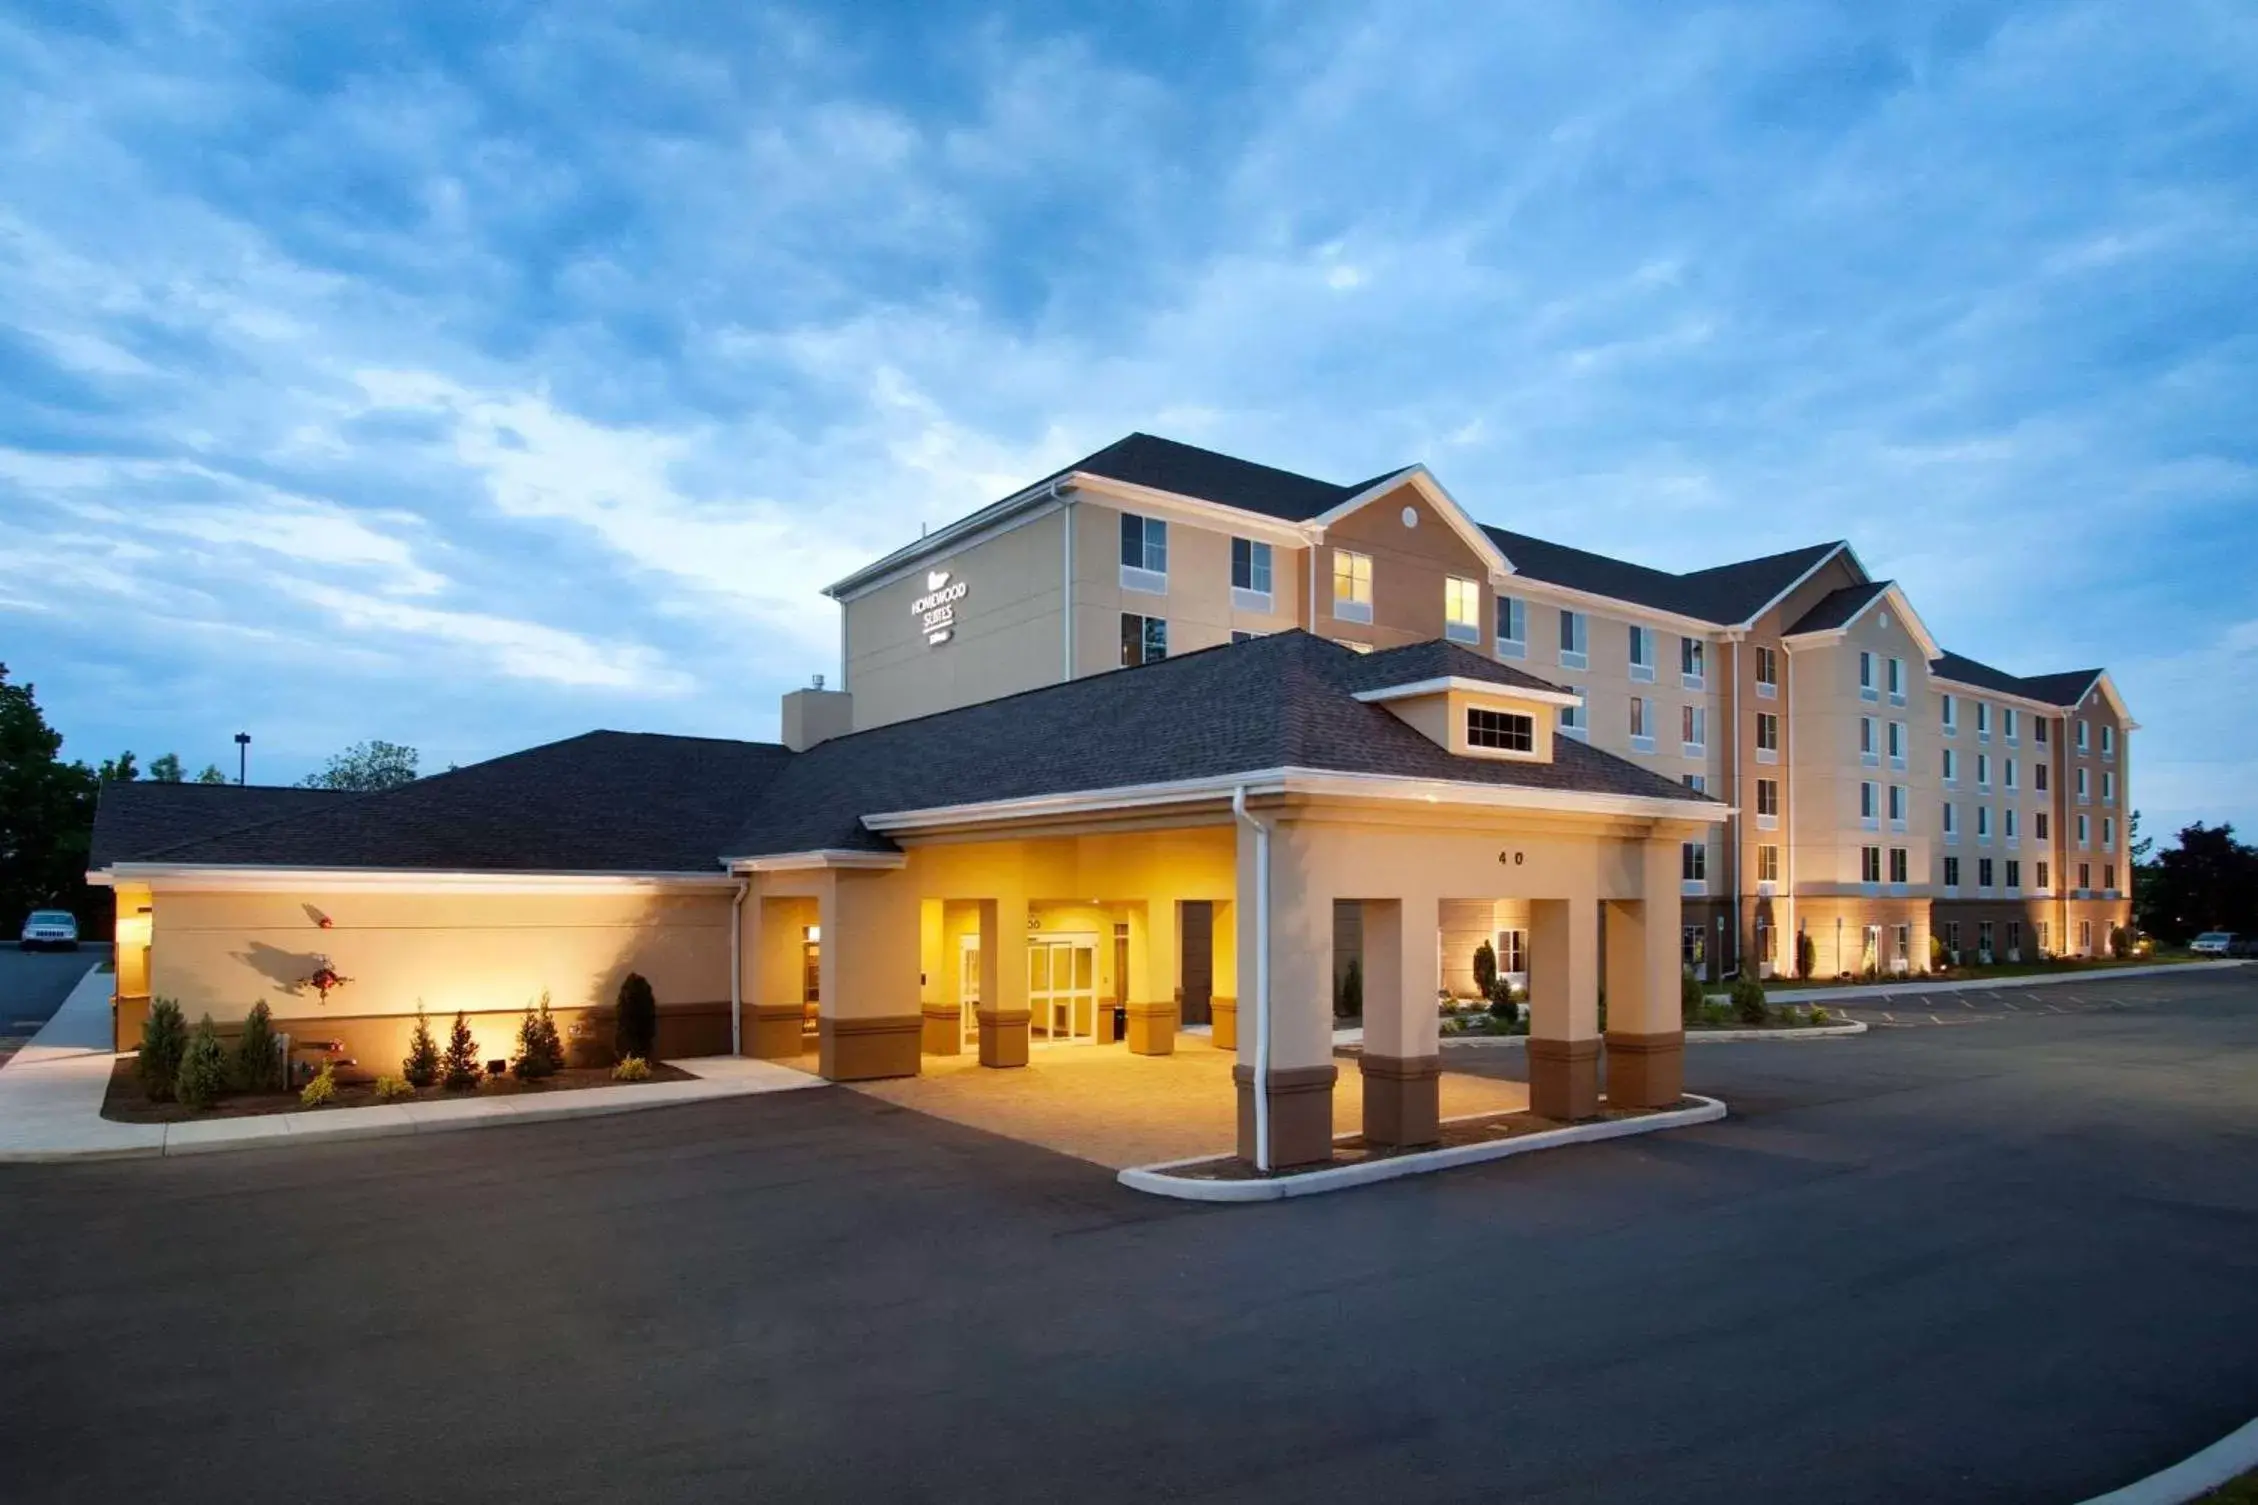 Property Building in Homewood Suites by Hilton Rochester/Greece, NY